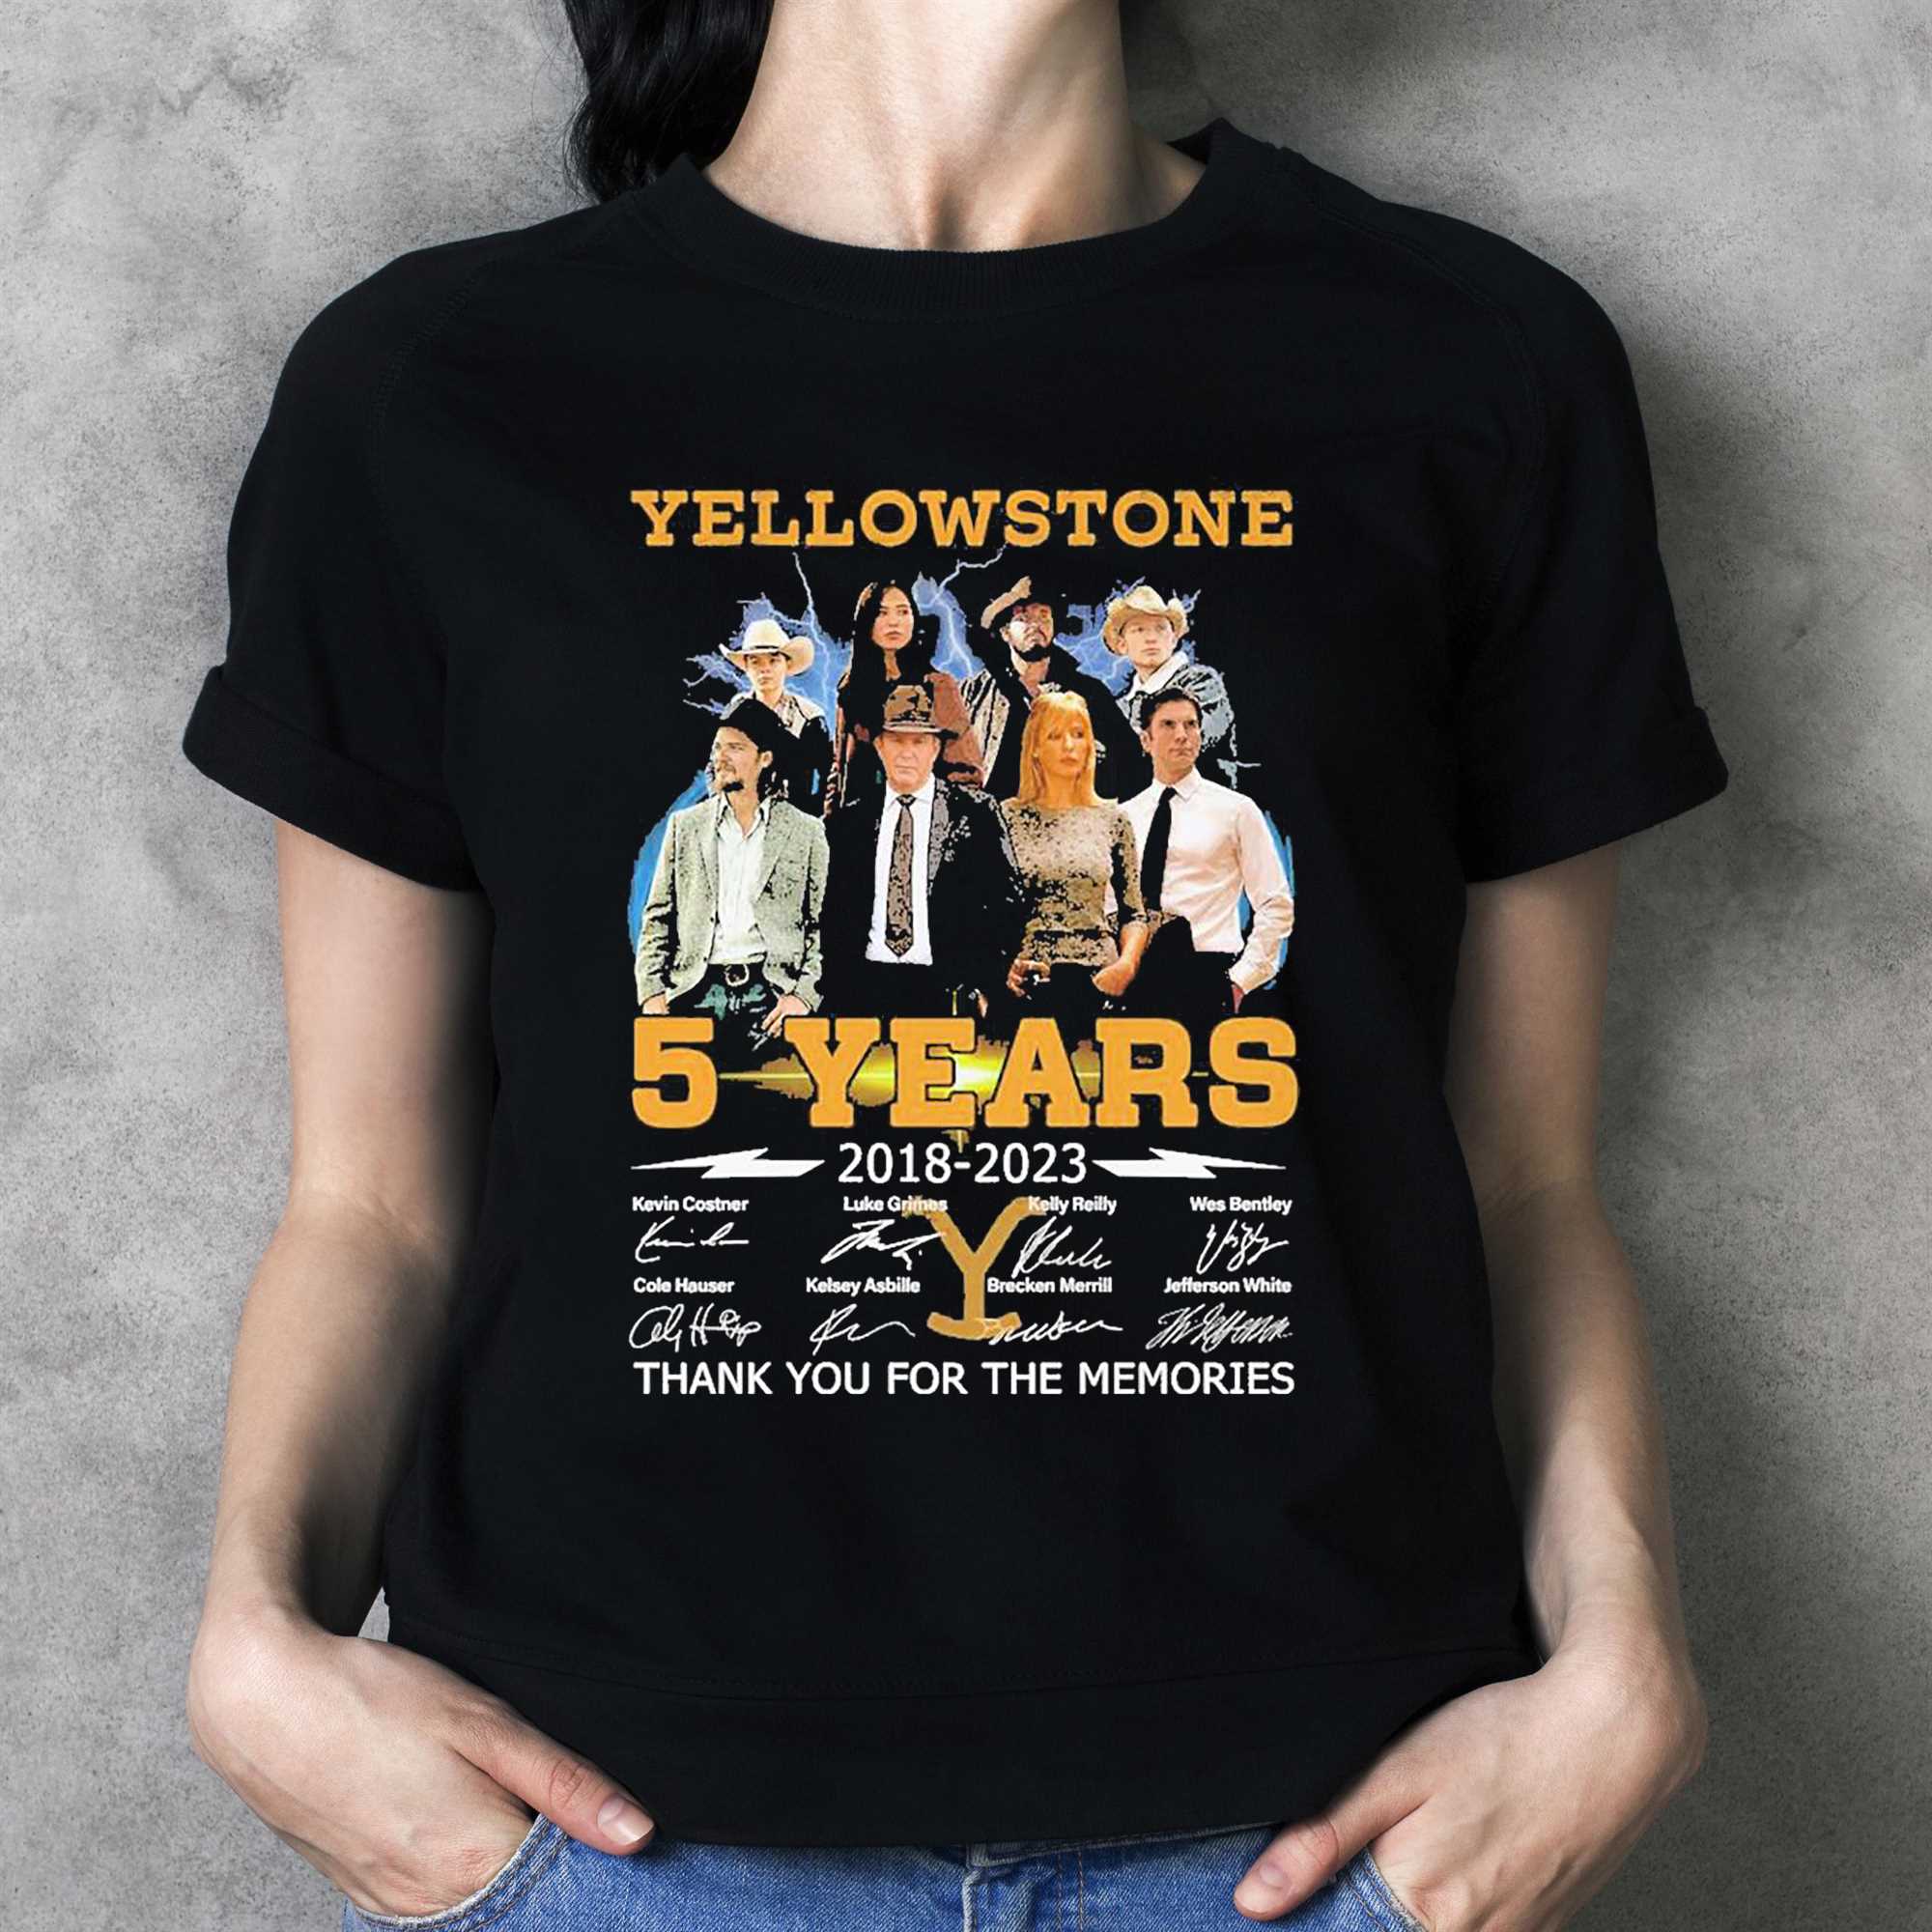 05 Years Anniversary Of Yellowstone 2018-2023 Thank You For The Memories Signatures Shirt 2